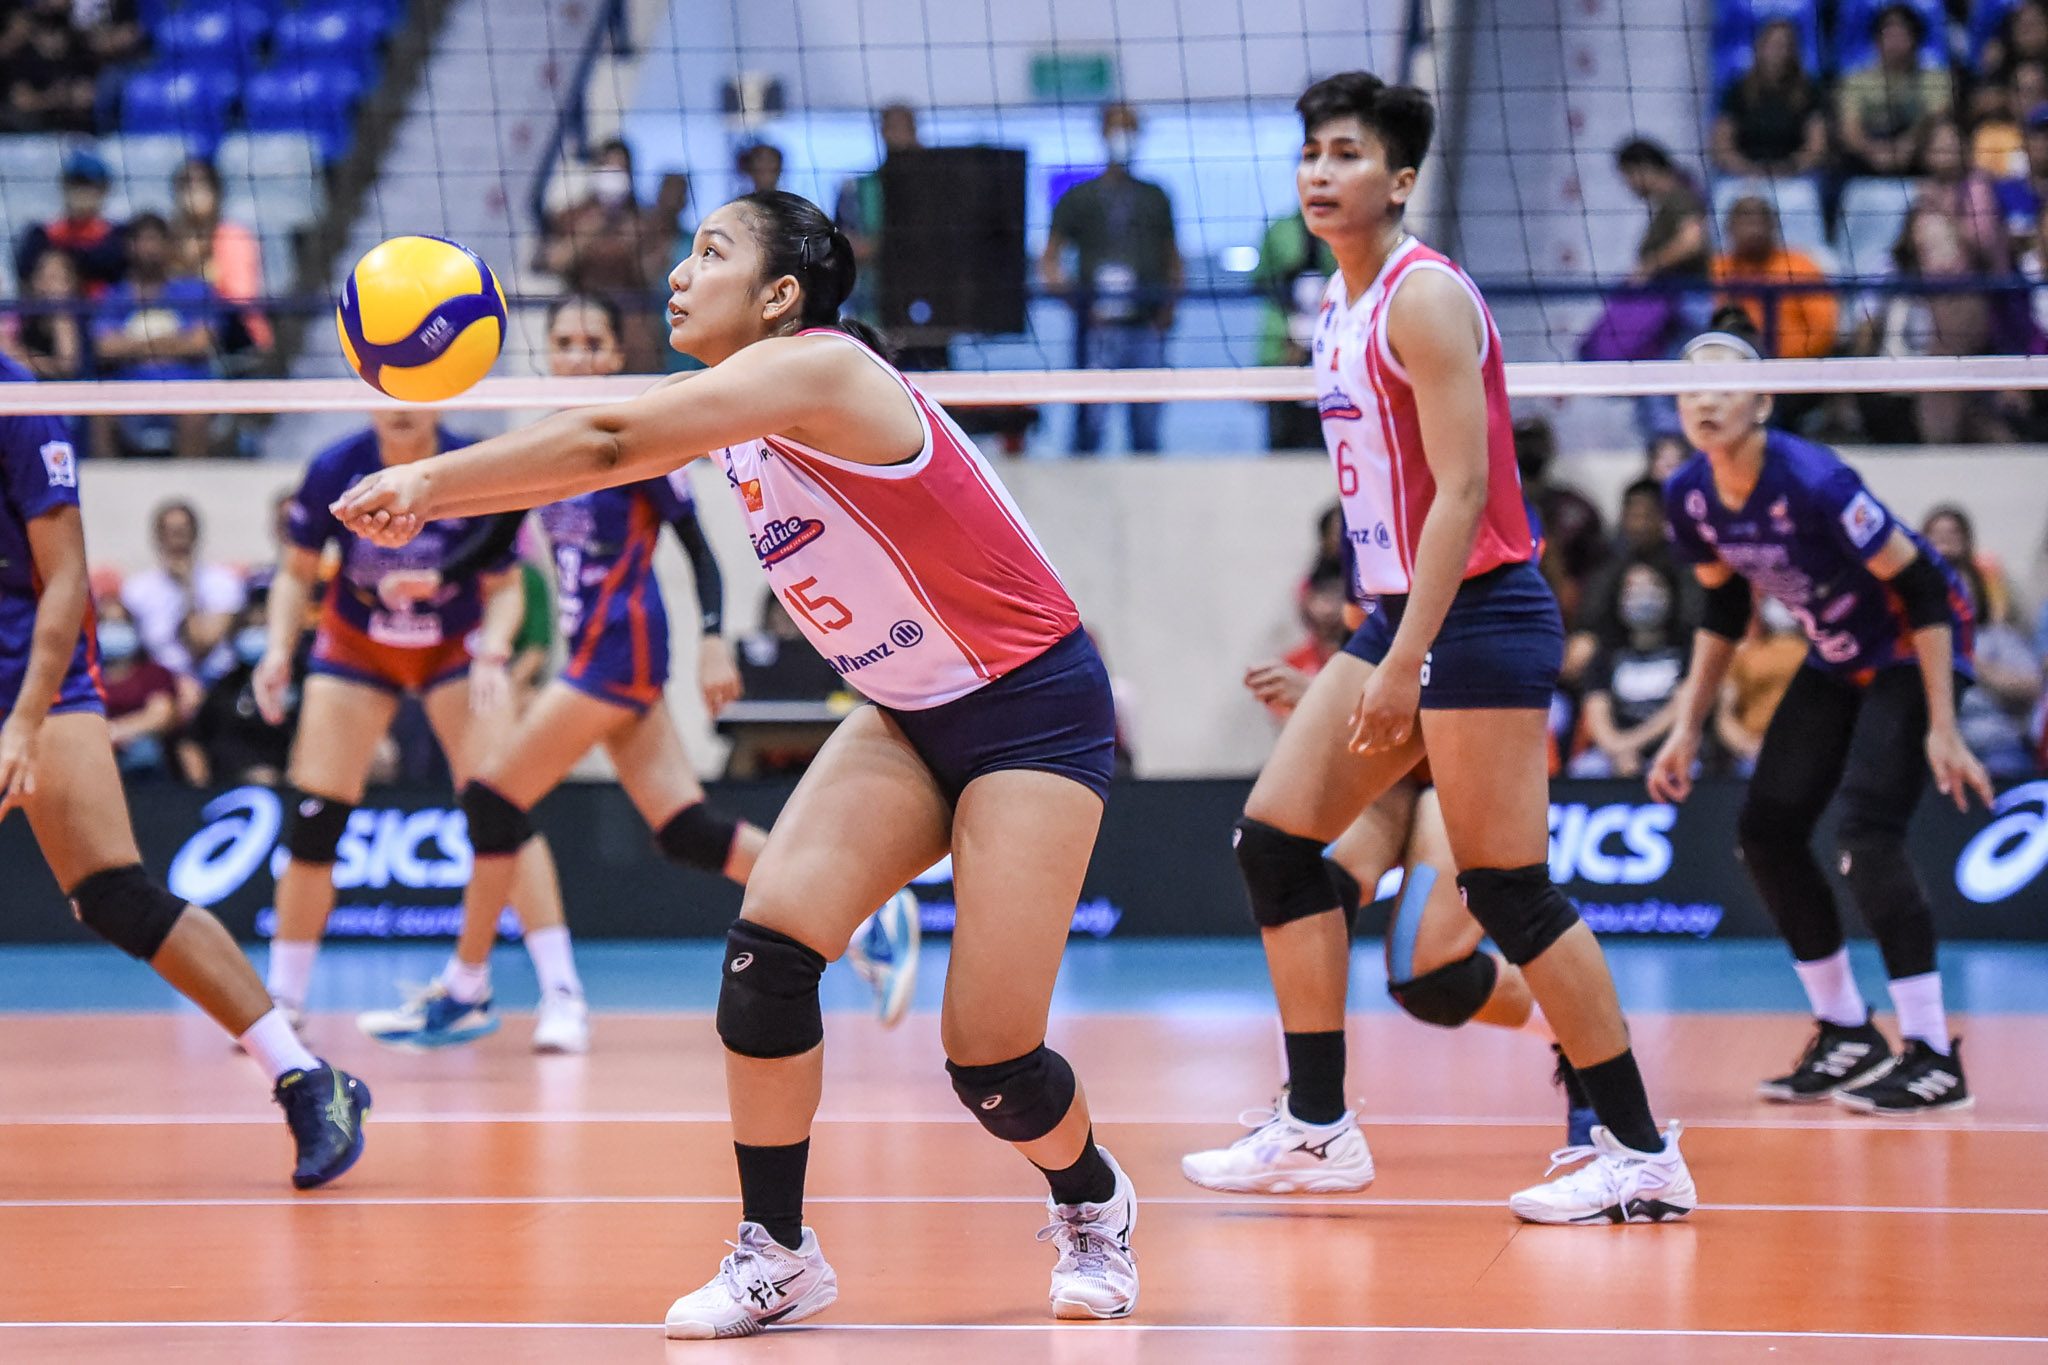 Creamline bench pummels Gerflor; Akari young stars step up in win over Farm Fresh